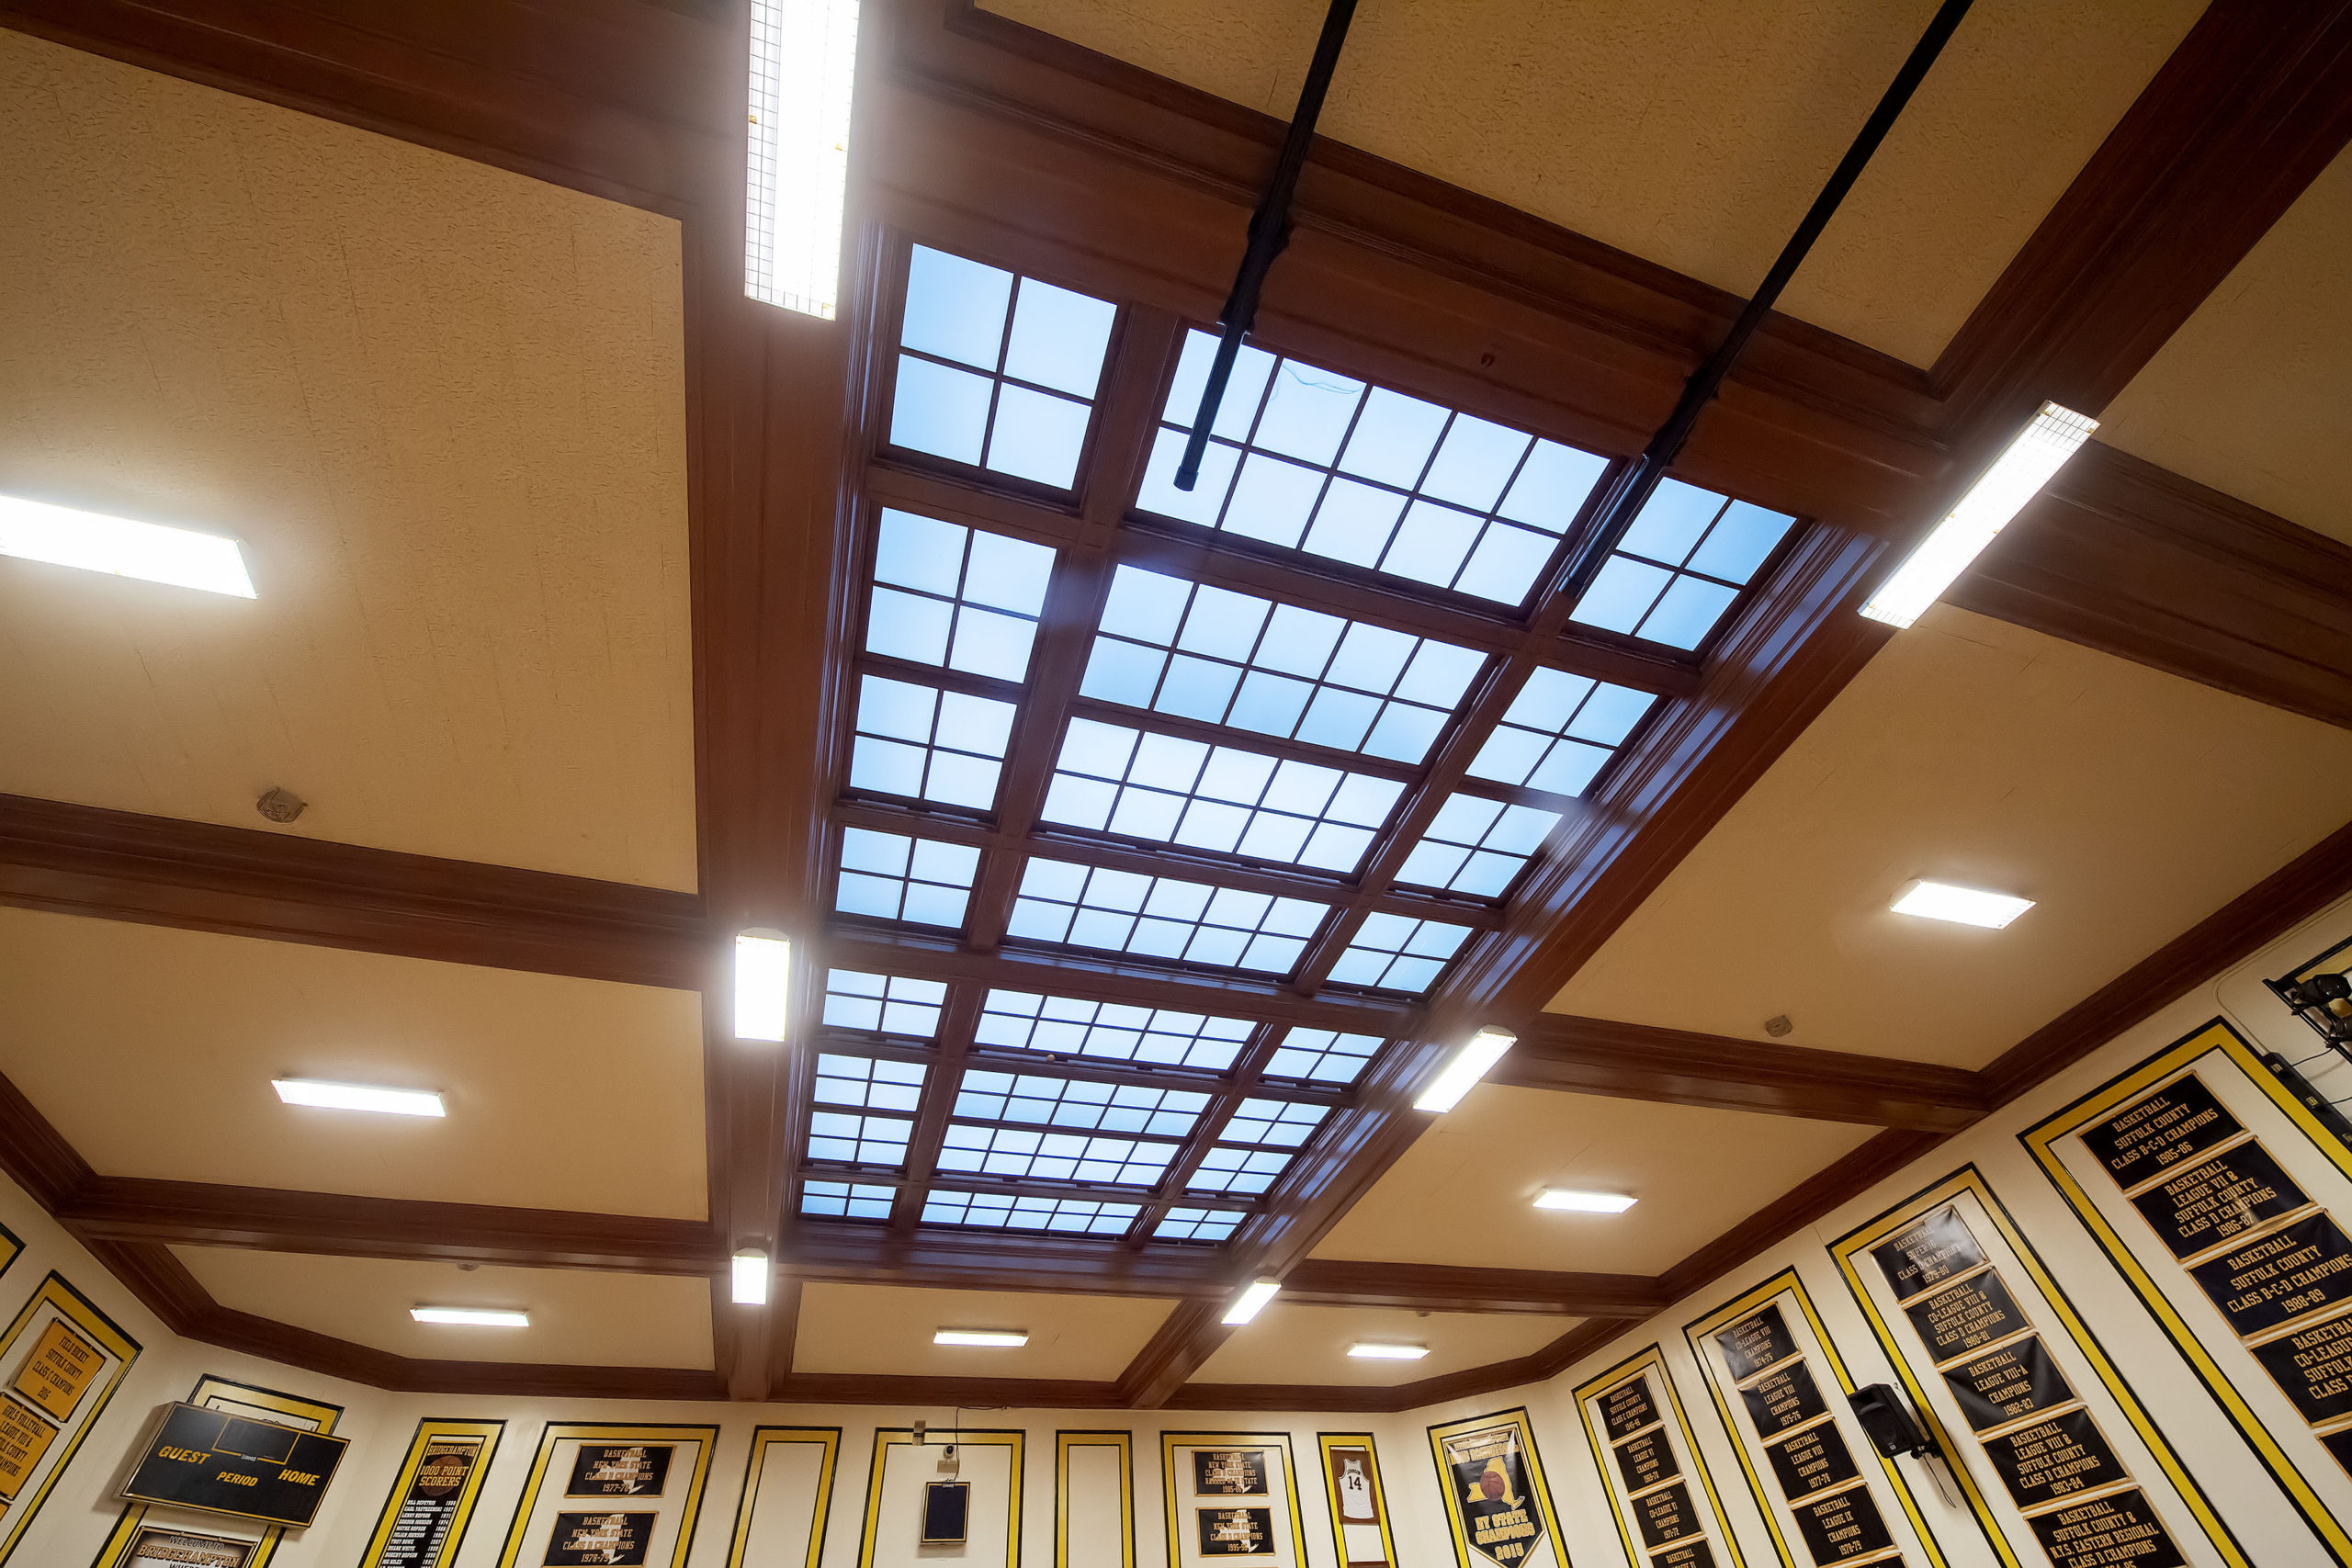 The skylight above The Hive court.